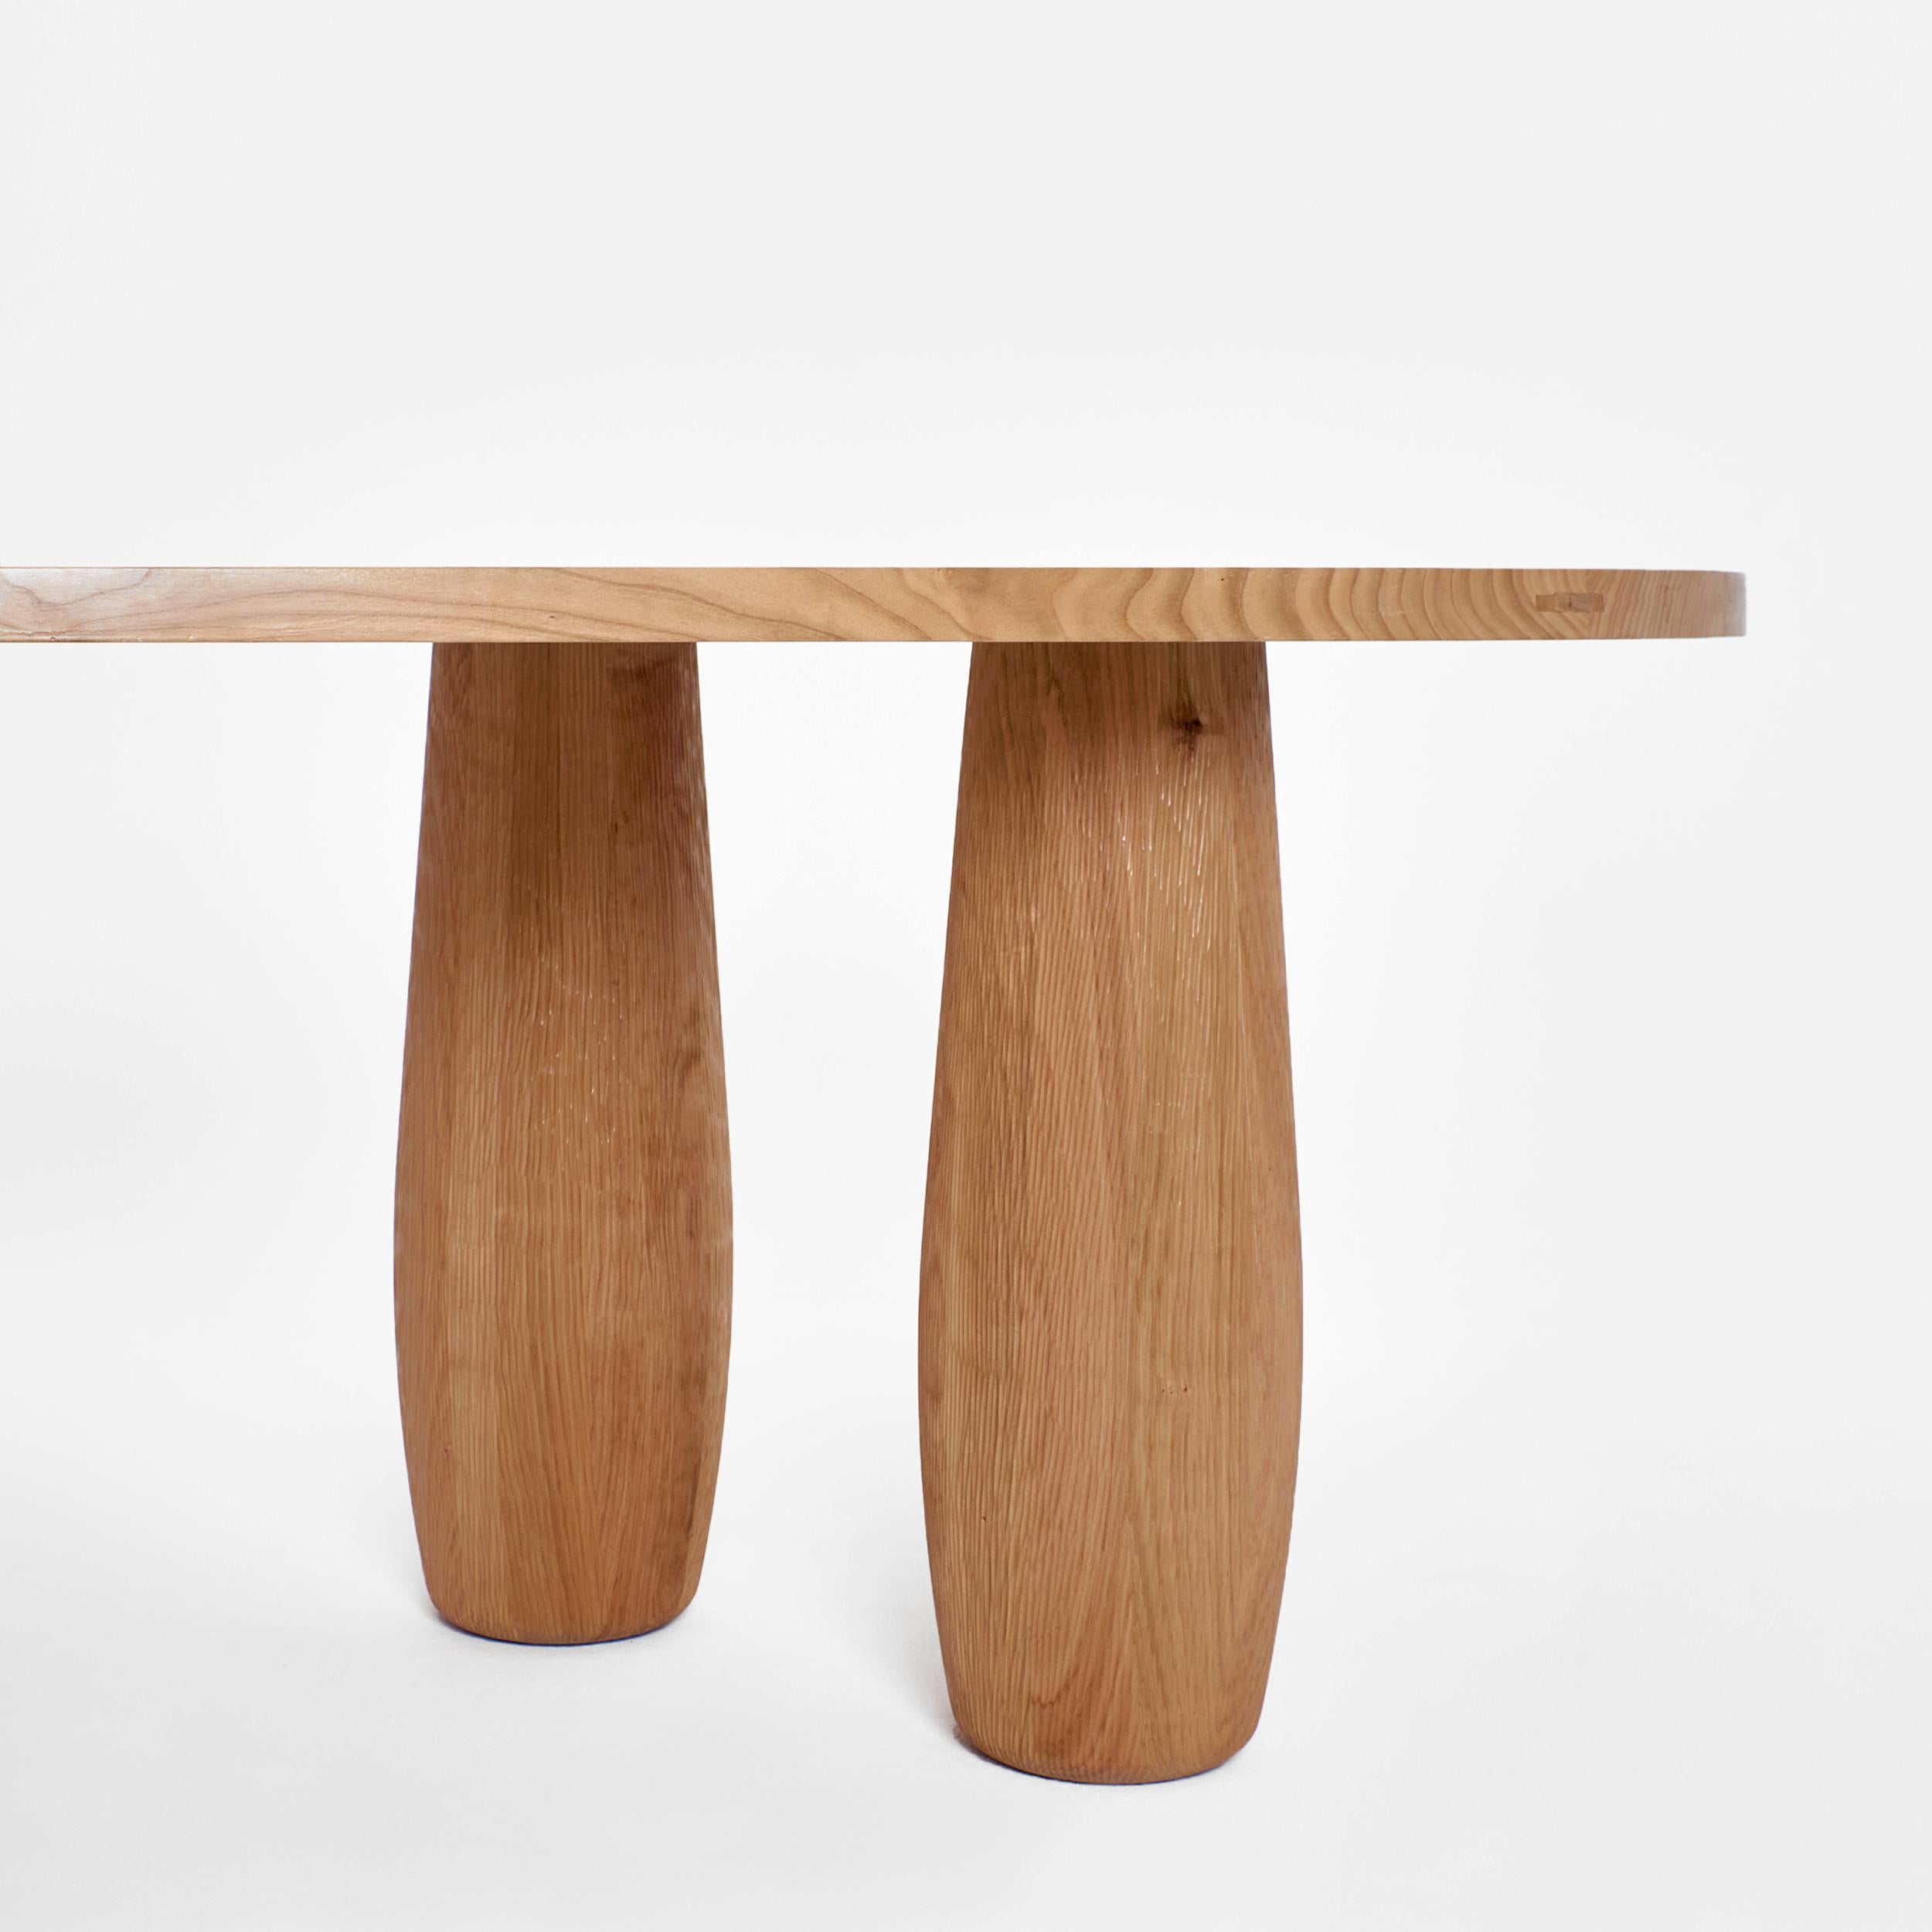 À table - dining table.
An asymmetric table top standing on five oval legs. Each segment carved from an individual piece of cherry wood to showcase the natural flow and texture of the wood with hand carved detailing. The table top features delicate